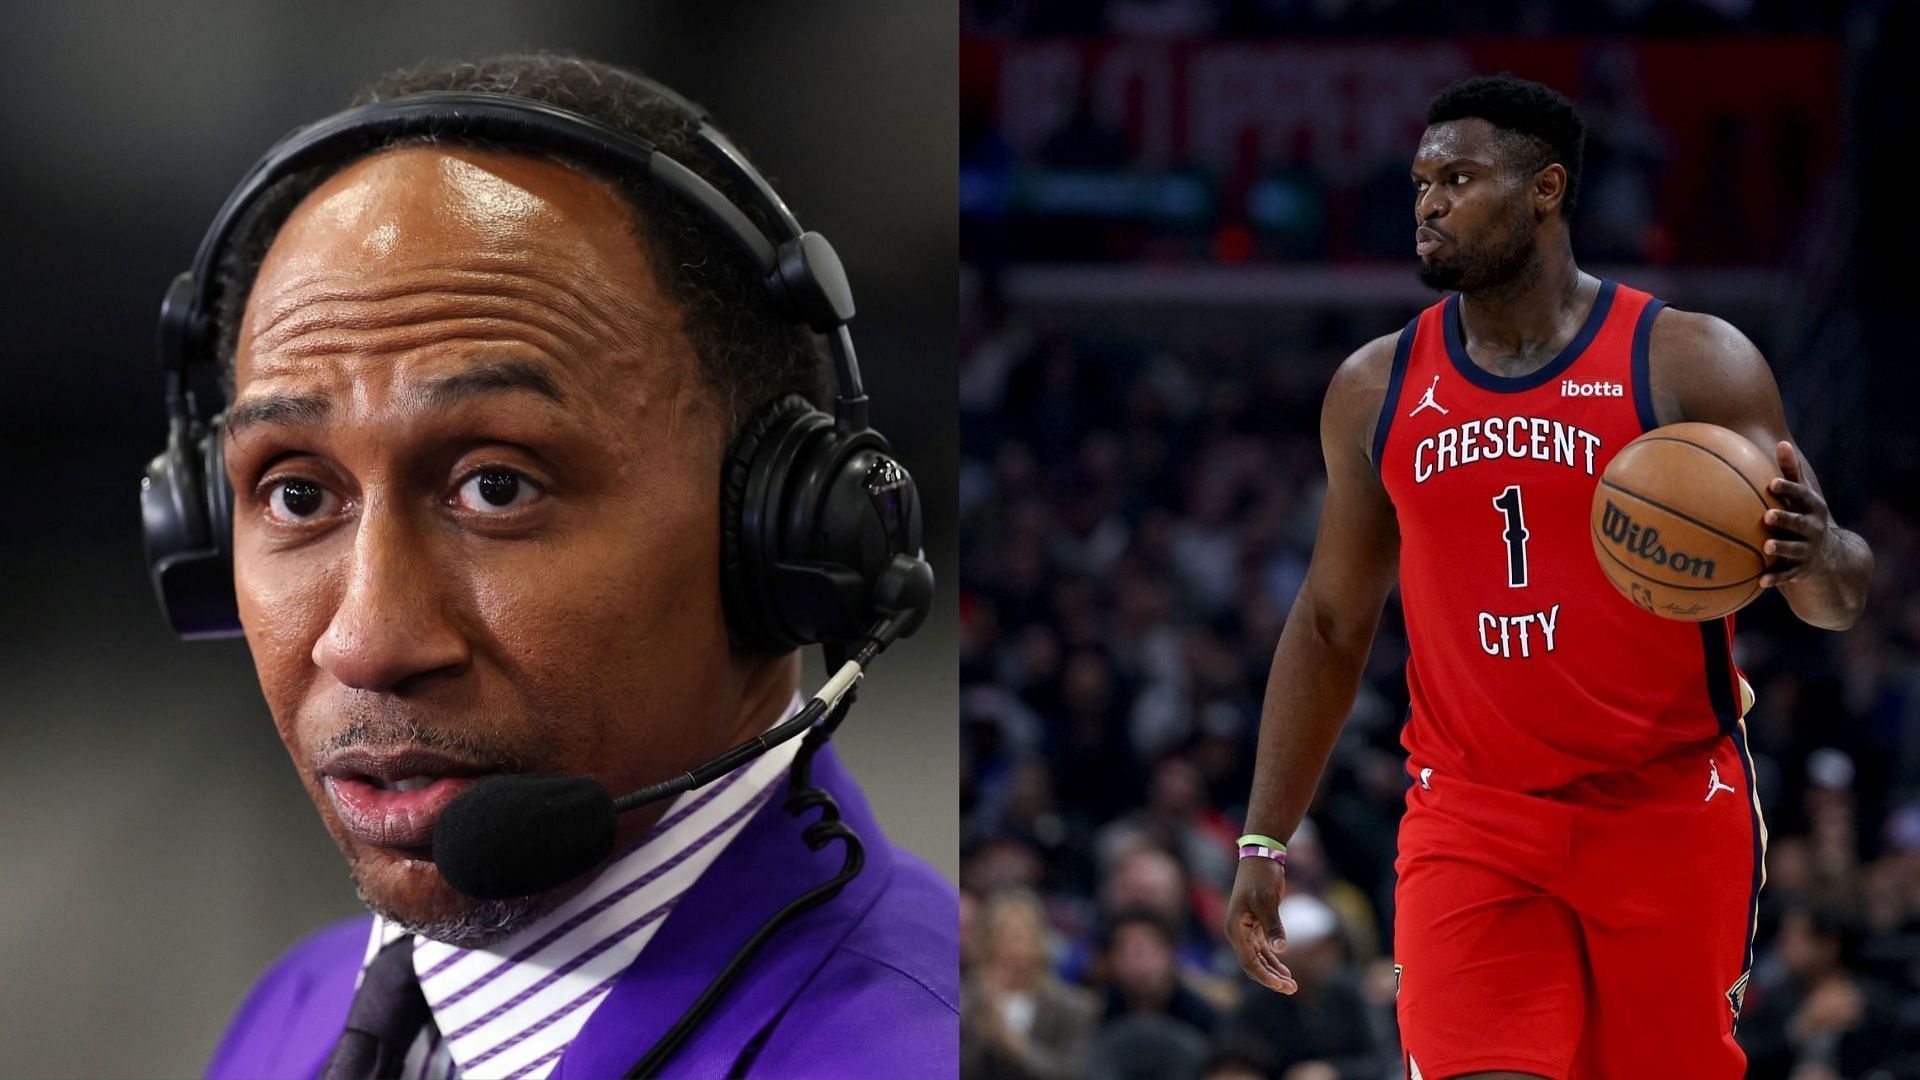 NBA fans react to Pelicans roasting Stephen A. Smith on Twitter for his rant against Zion Williamson